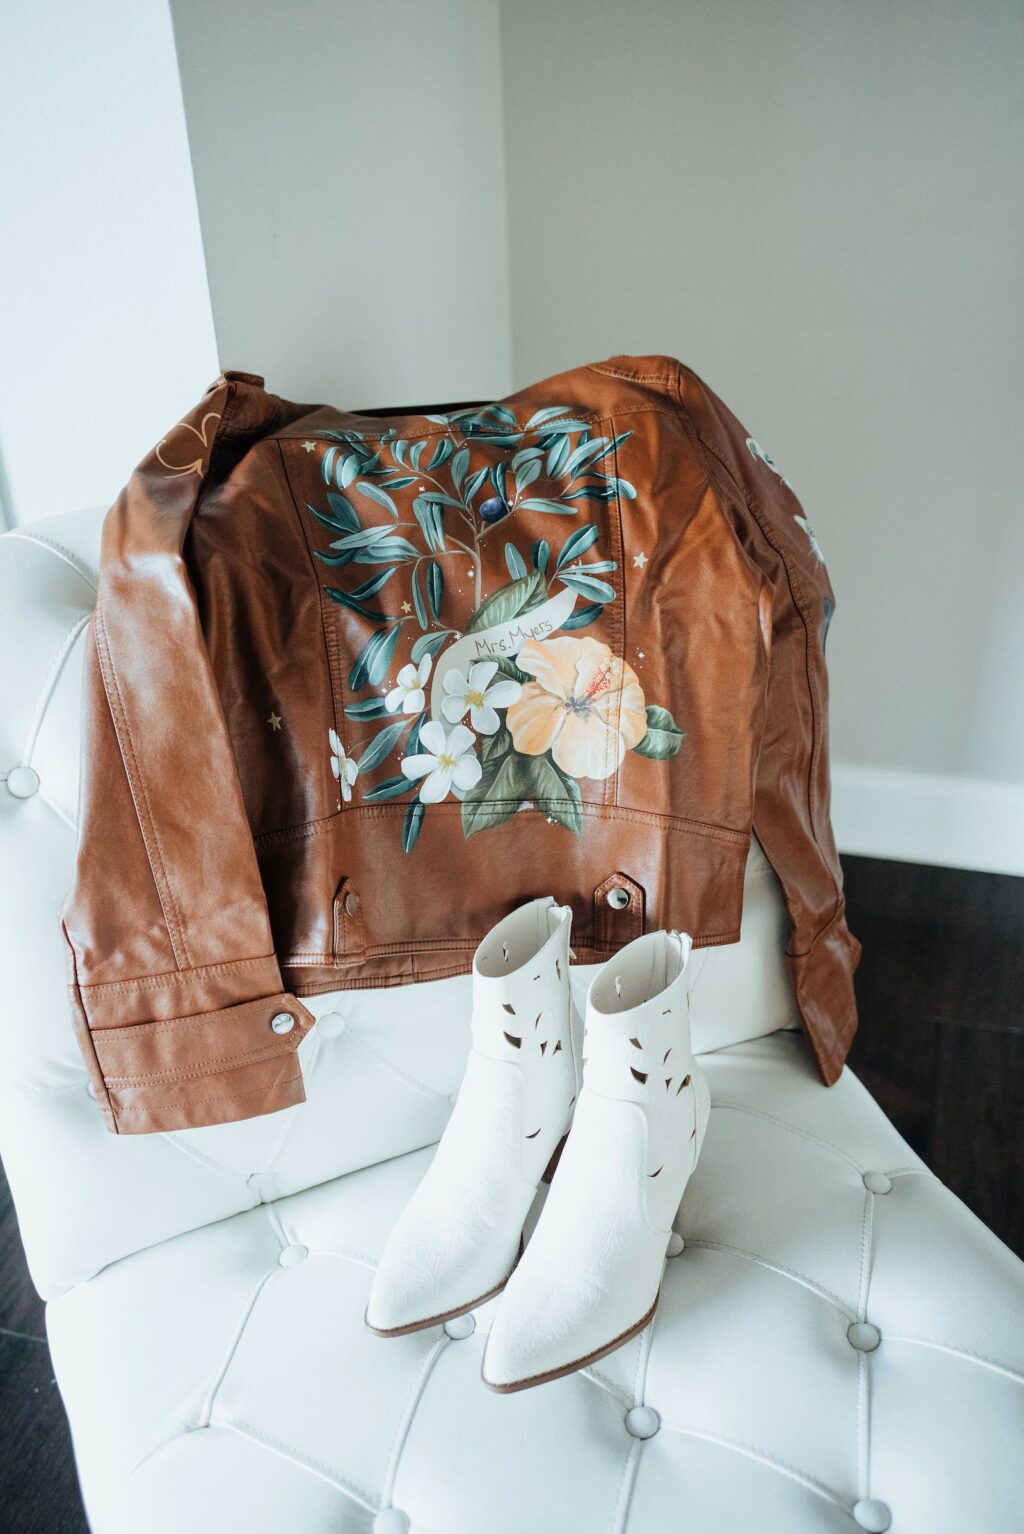 Painted Leather Jacket and White Boots | Bridal Bohemian Wedding Style